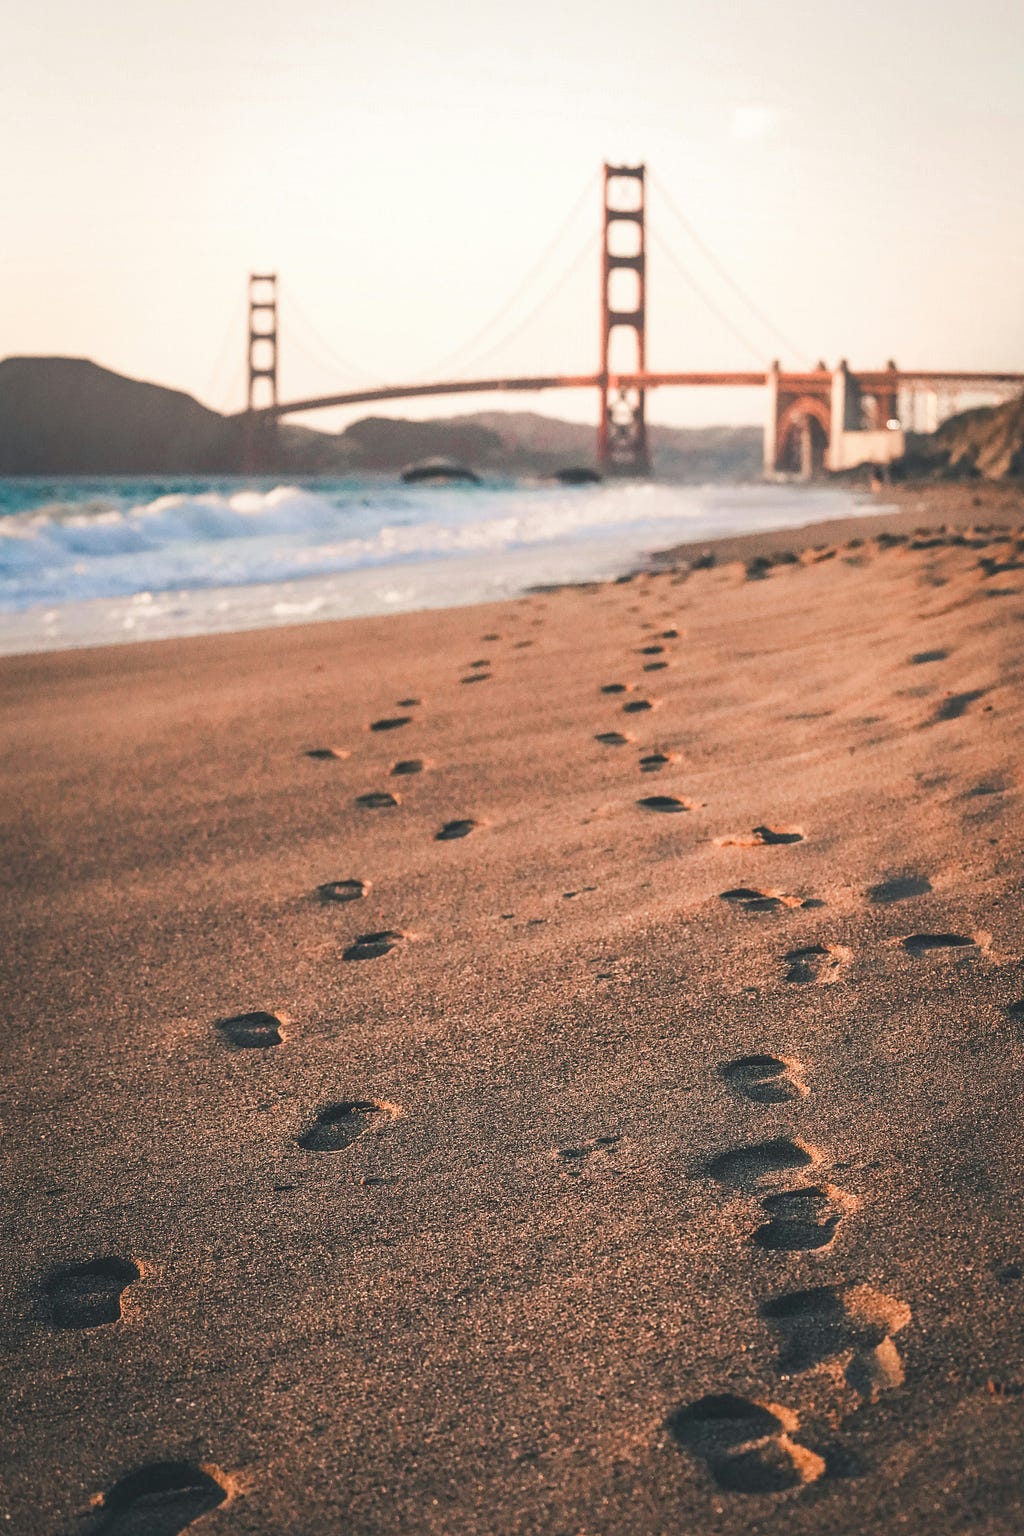 A picture of footprints in the sand with a waterbody and a bridge at the horizon, used to signify the journey and the hope that waits beyond.